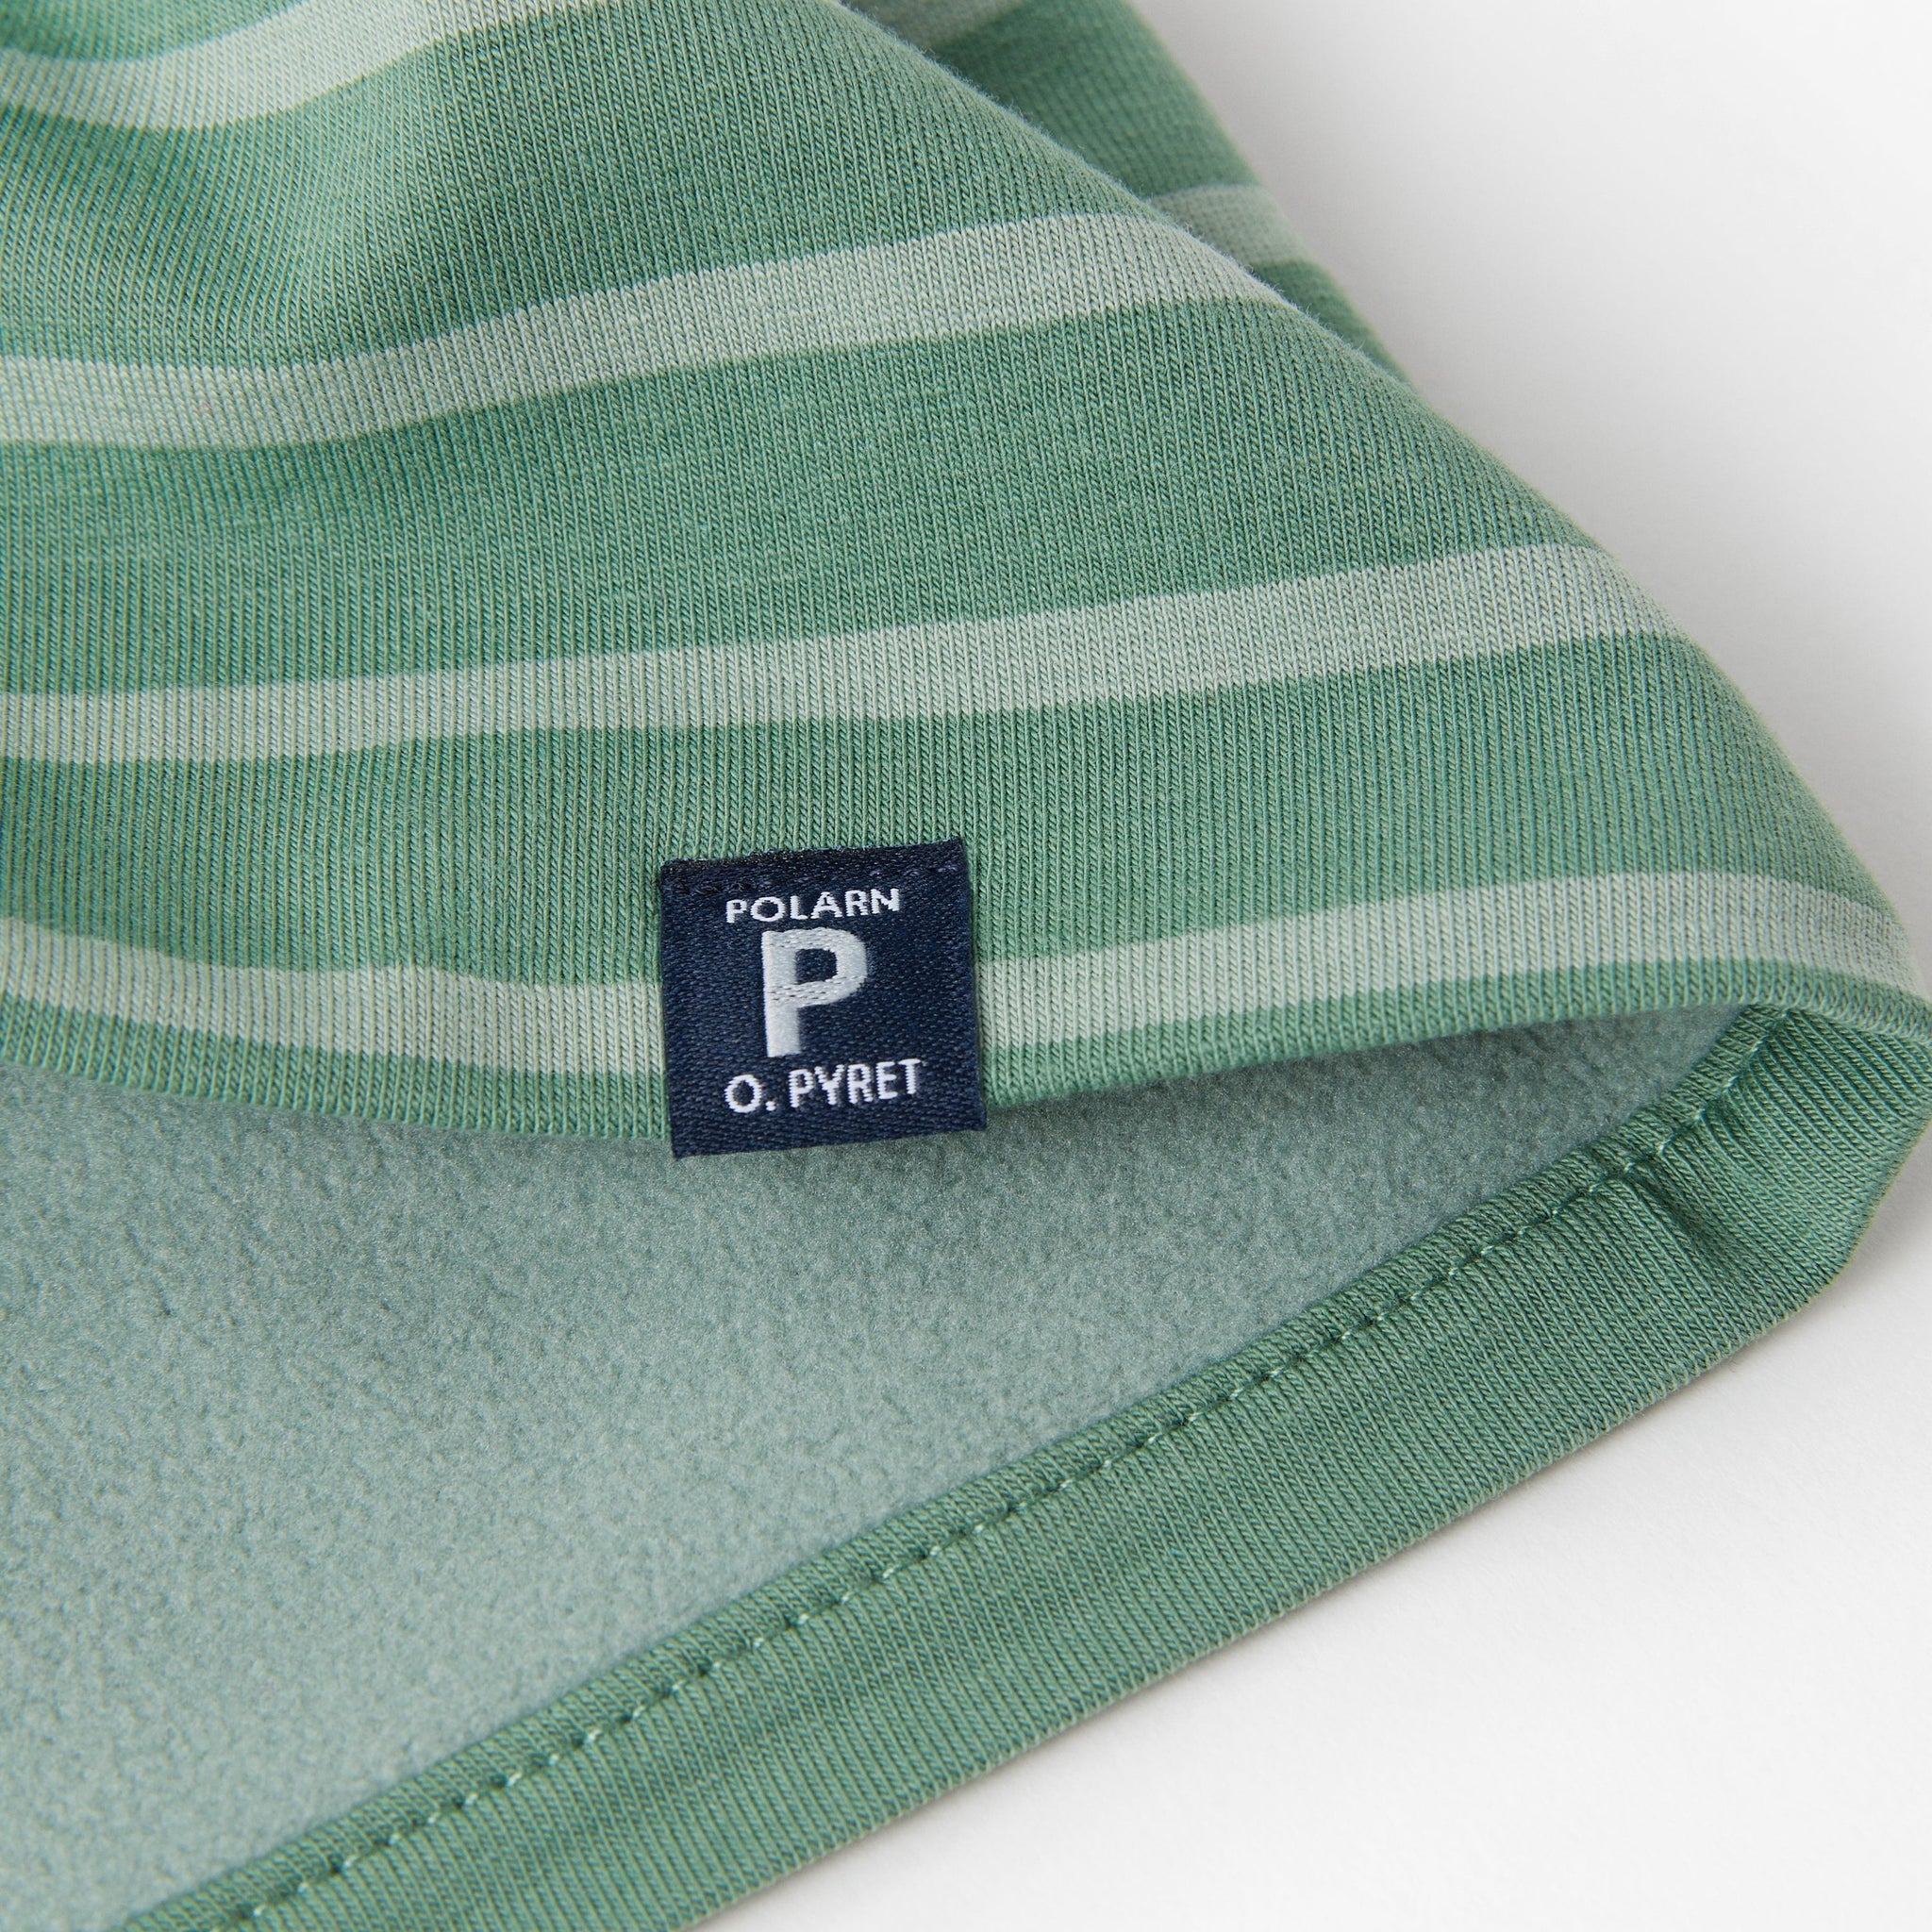 Green Fleece Lined Kids Snood from the Polarn O. Pyret kidswear collection. Ethically produced kids outerwear.